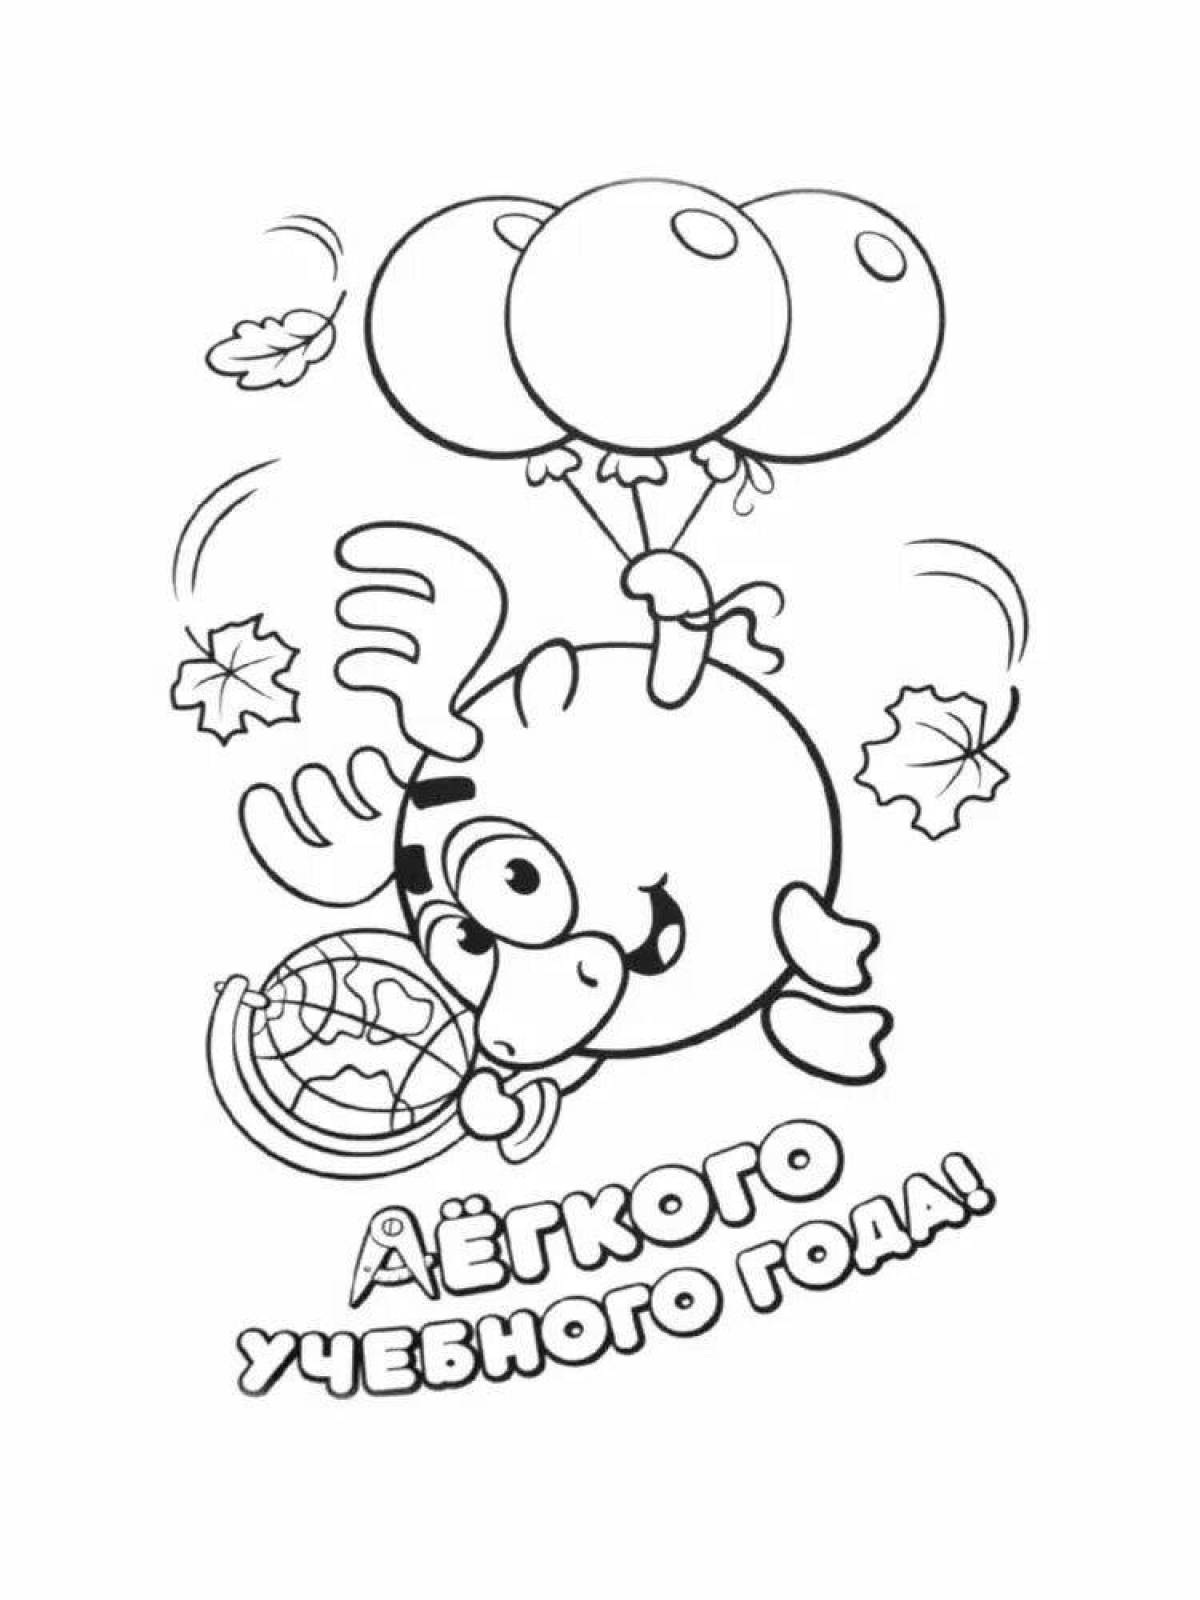 Happy birthday school coloring page filled with color